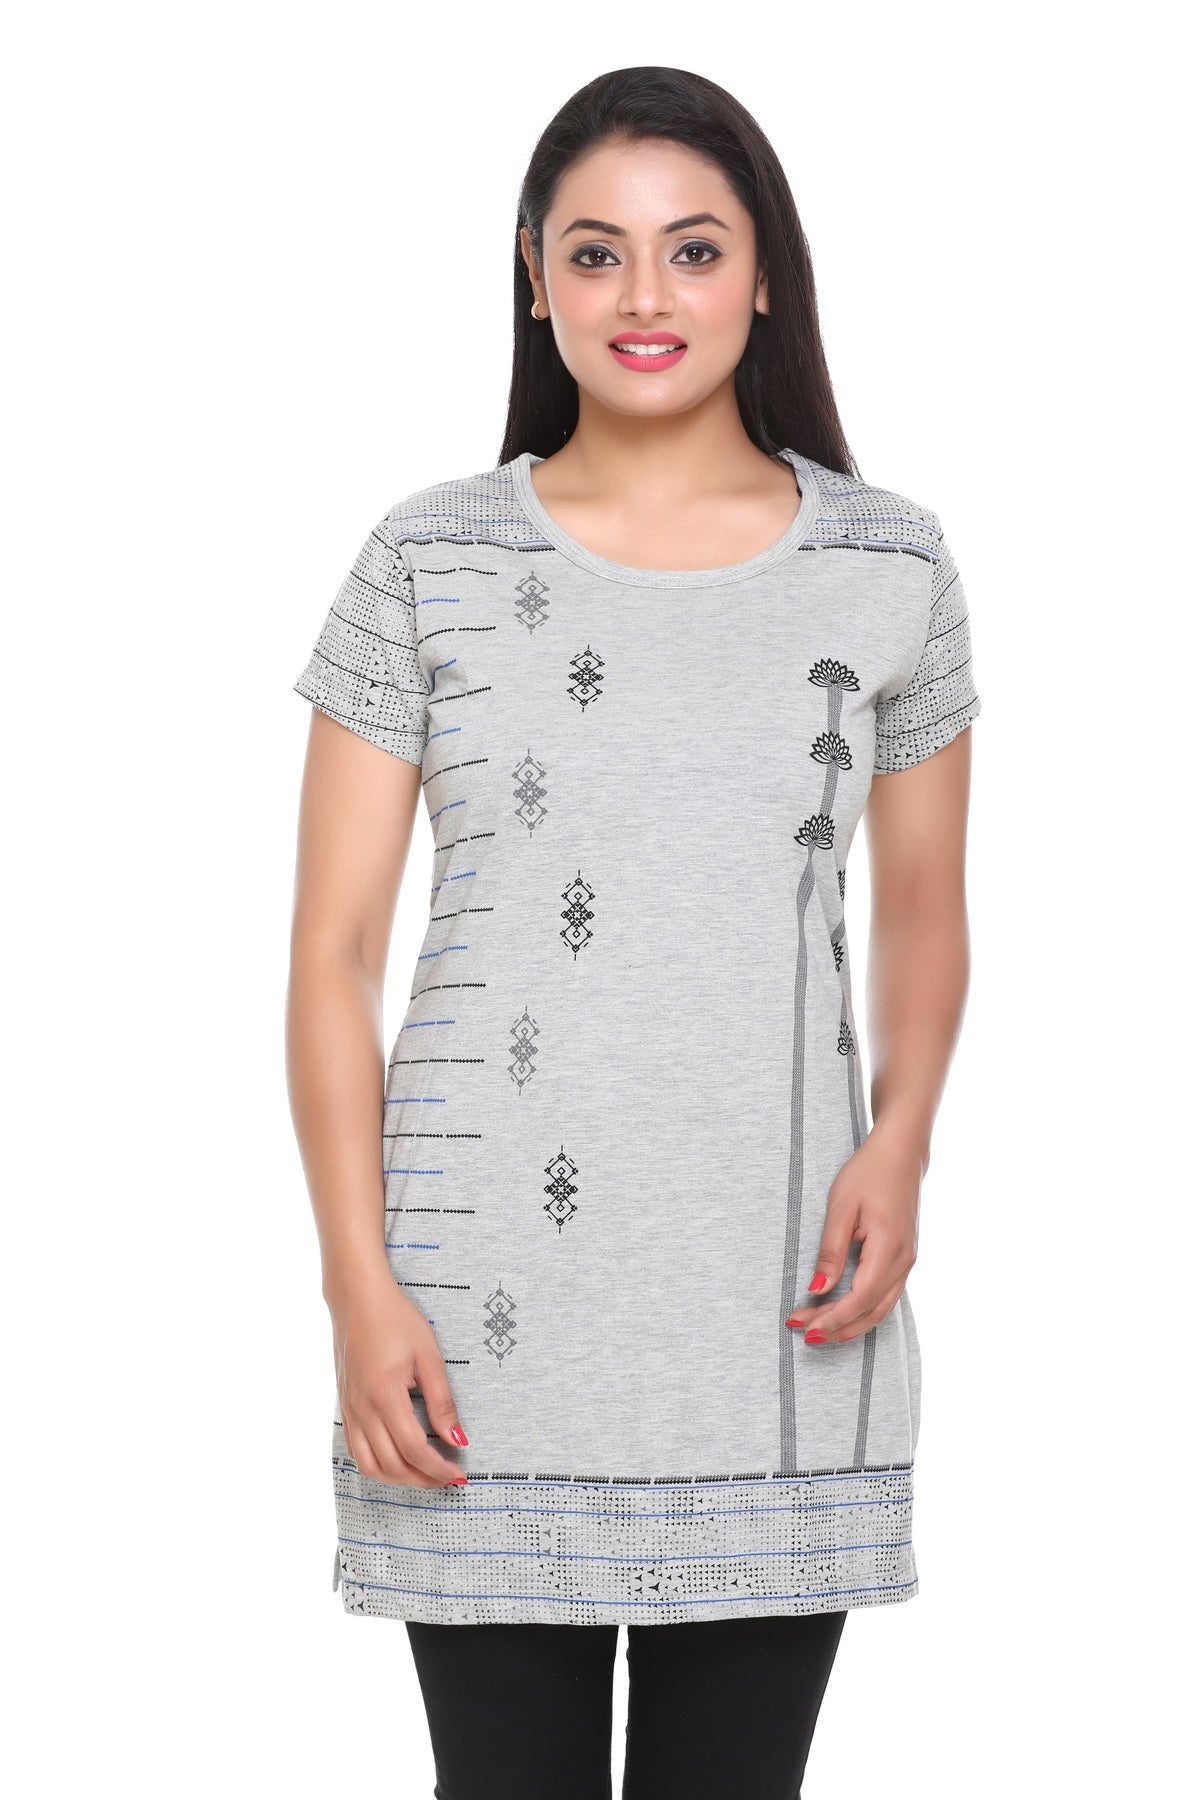 Comfy Grey Printed Cotton Long T-shirt (Half Sleeves)For Women Online In India